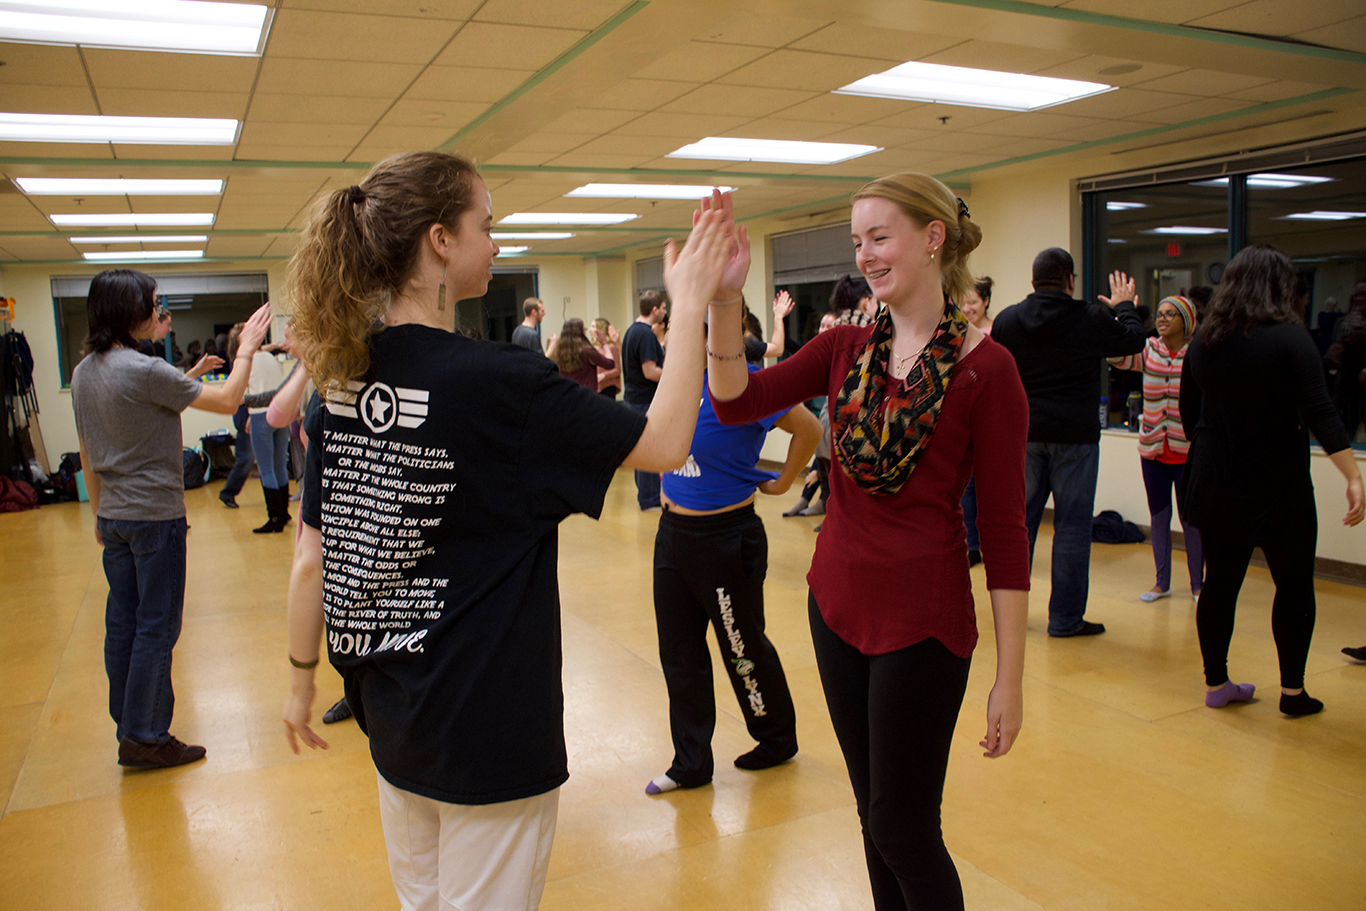 Students high-five each other in a dance studio during dance class.